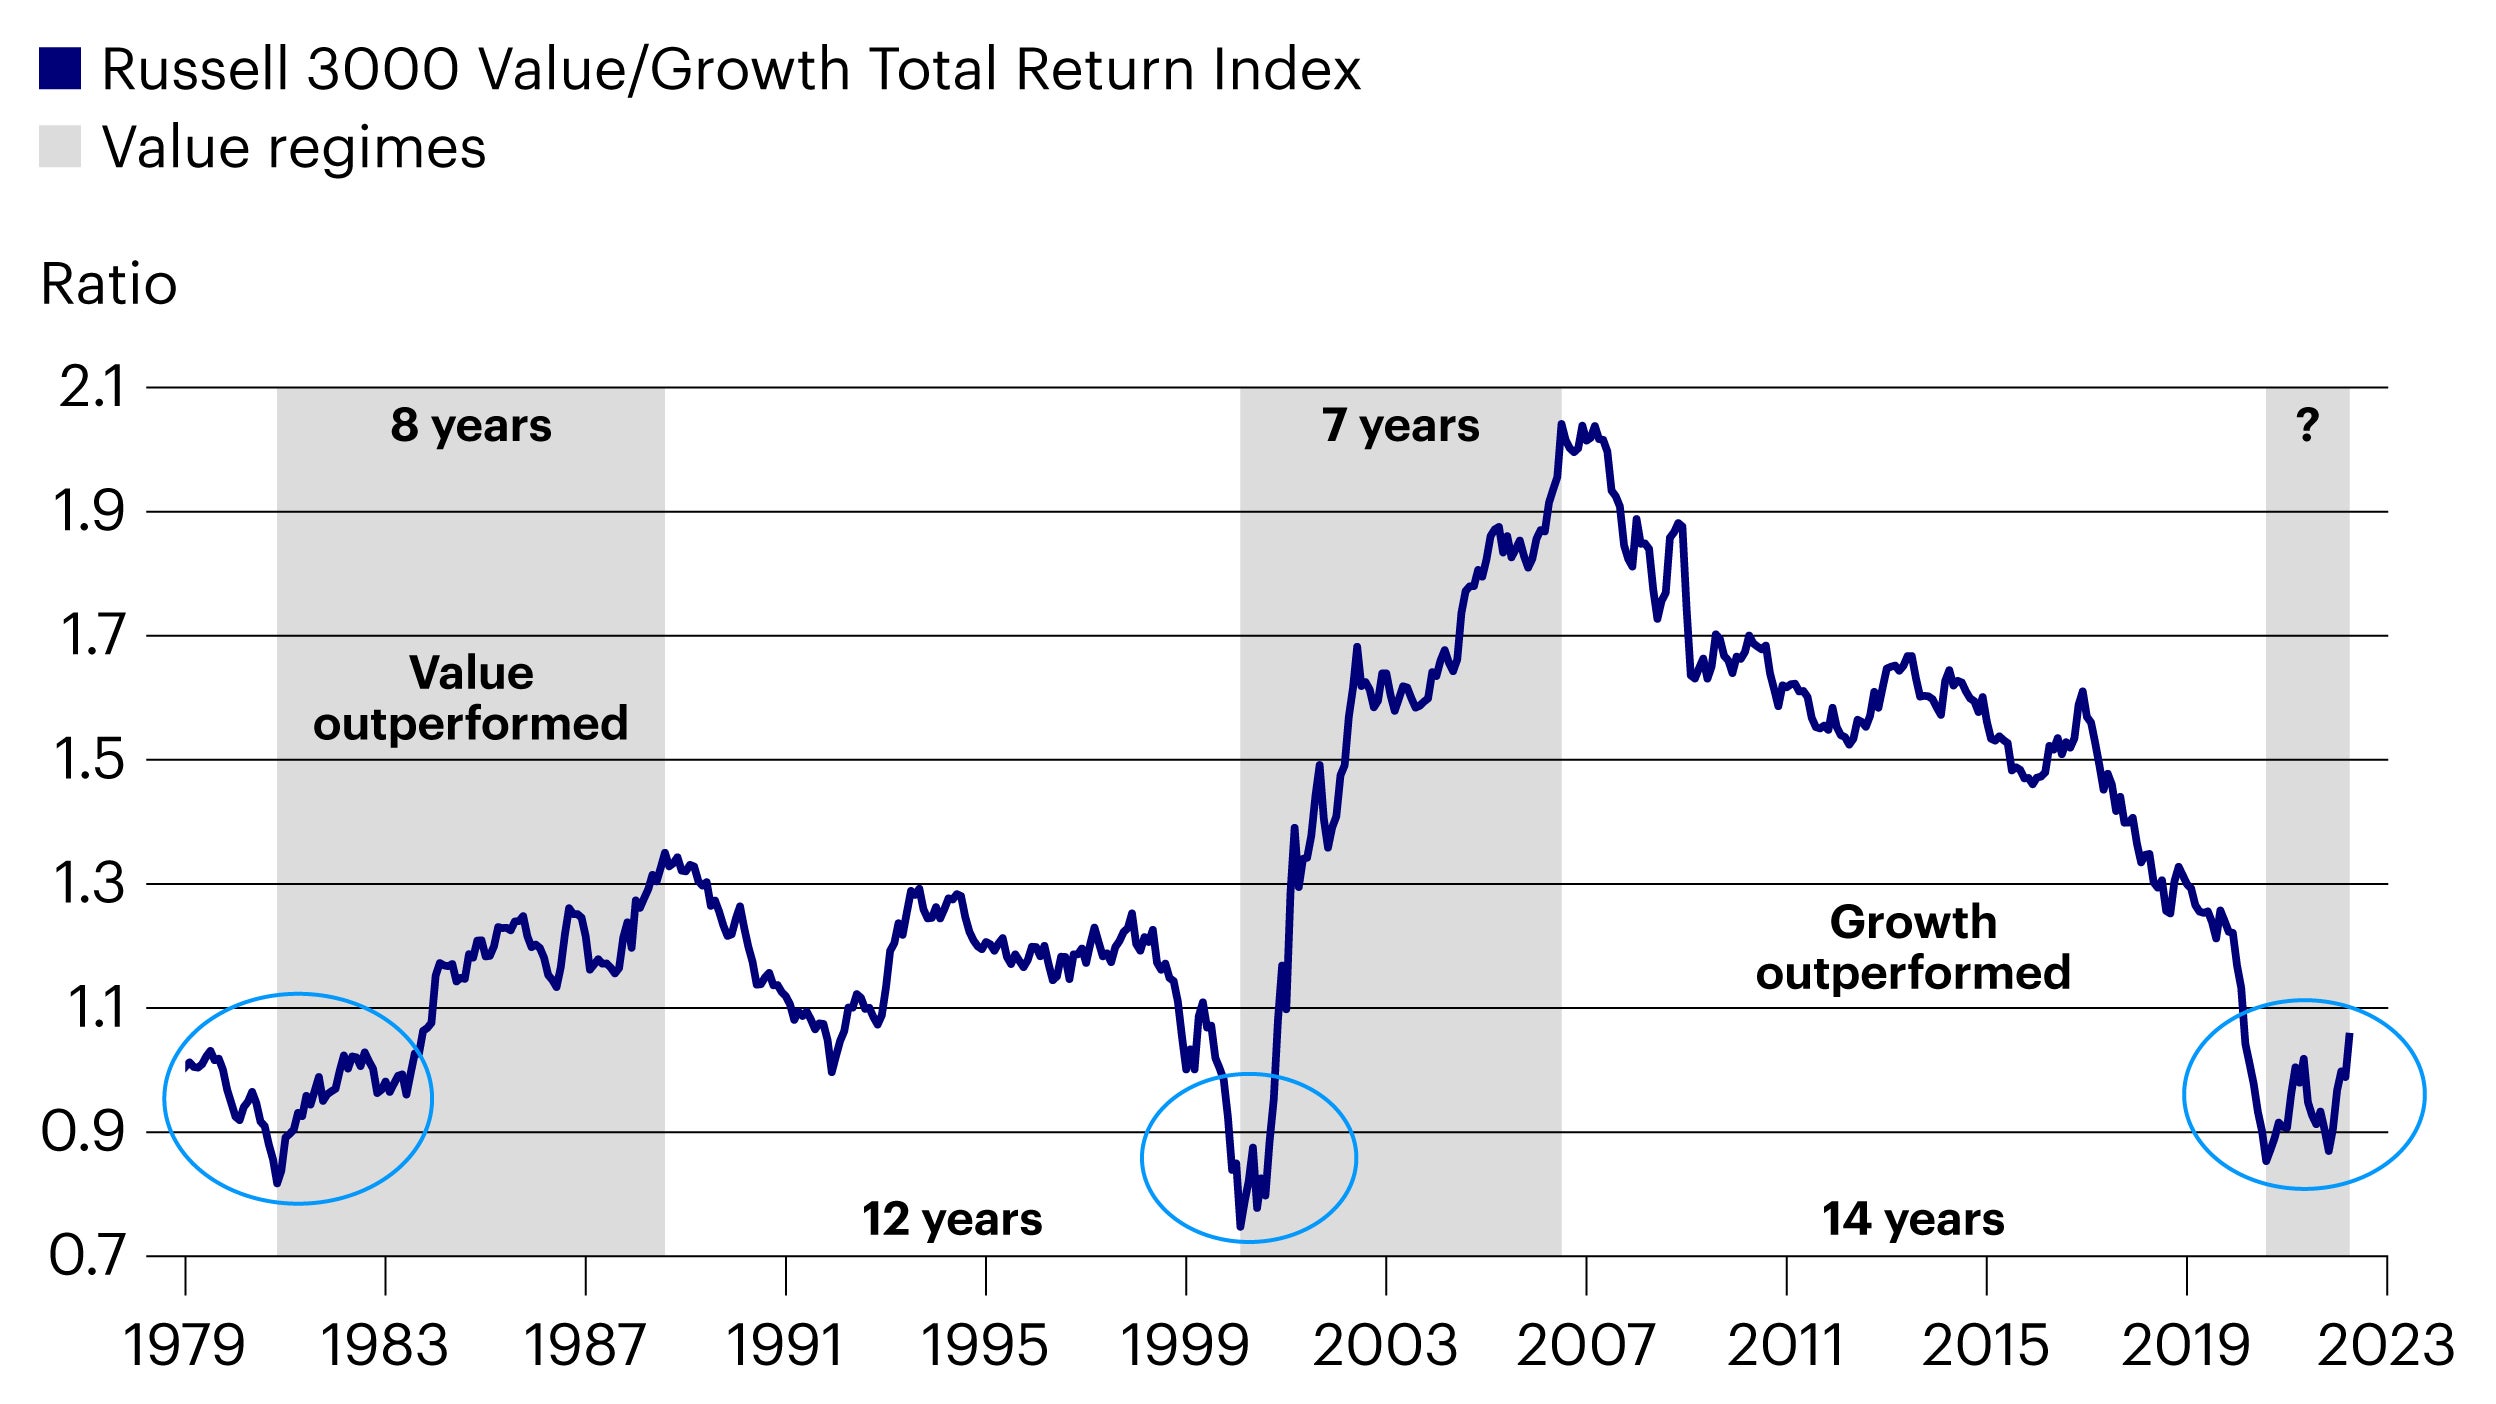 Value investing has underperformed for 14 years, but the tectonic plates are shifting